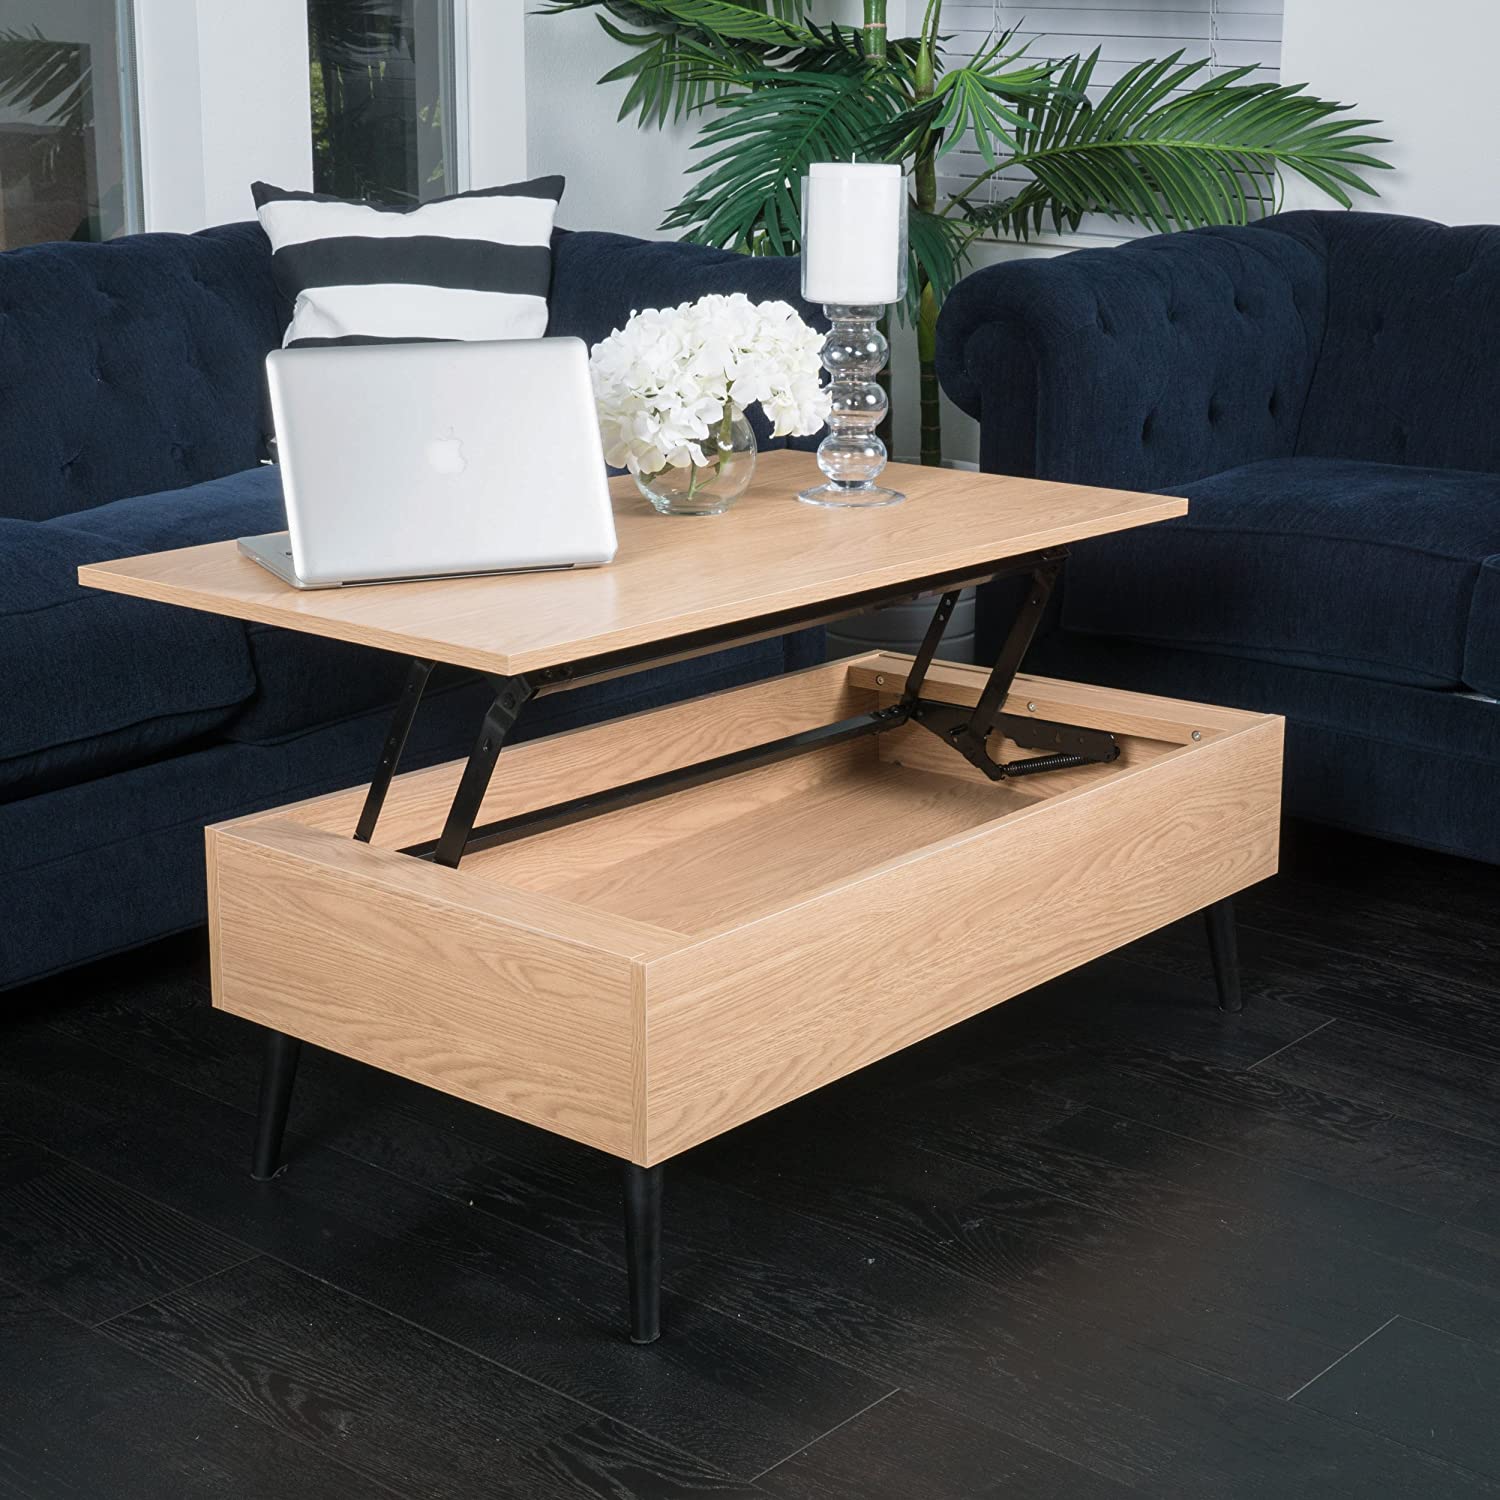 12 Best Convertible Coffee Table to Dining Table / Transforming Coffee ...